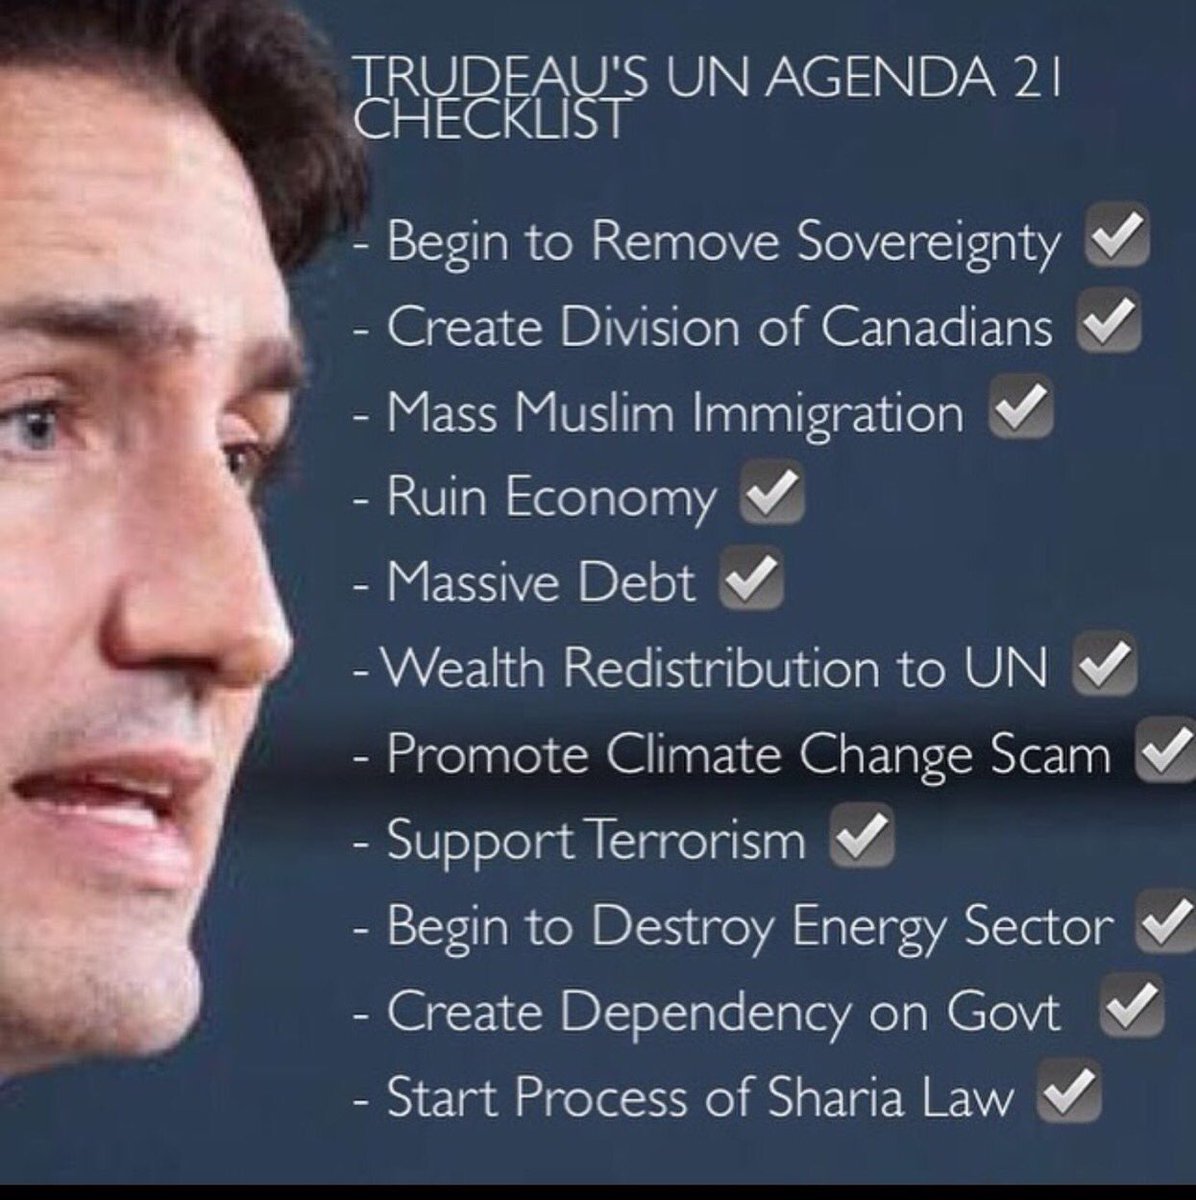 I do not want to hear the globalist mantra 'build back better' ever again.  Canada must remain a free, strong and independent country and you are the biggest impediment to ensuring this occurs.  #TrudeauTheTraitor #TrudeauWorstPMEver #cdnpoli